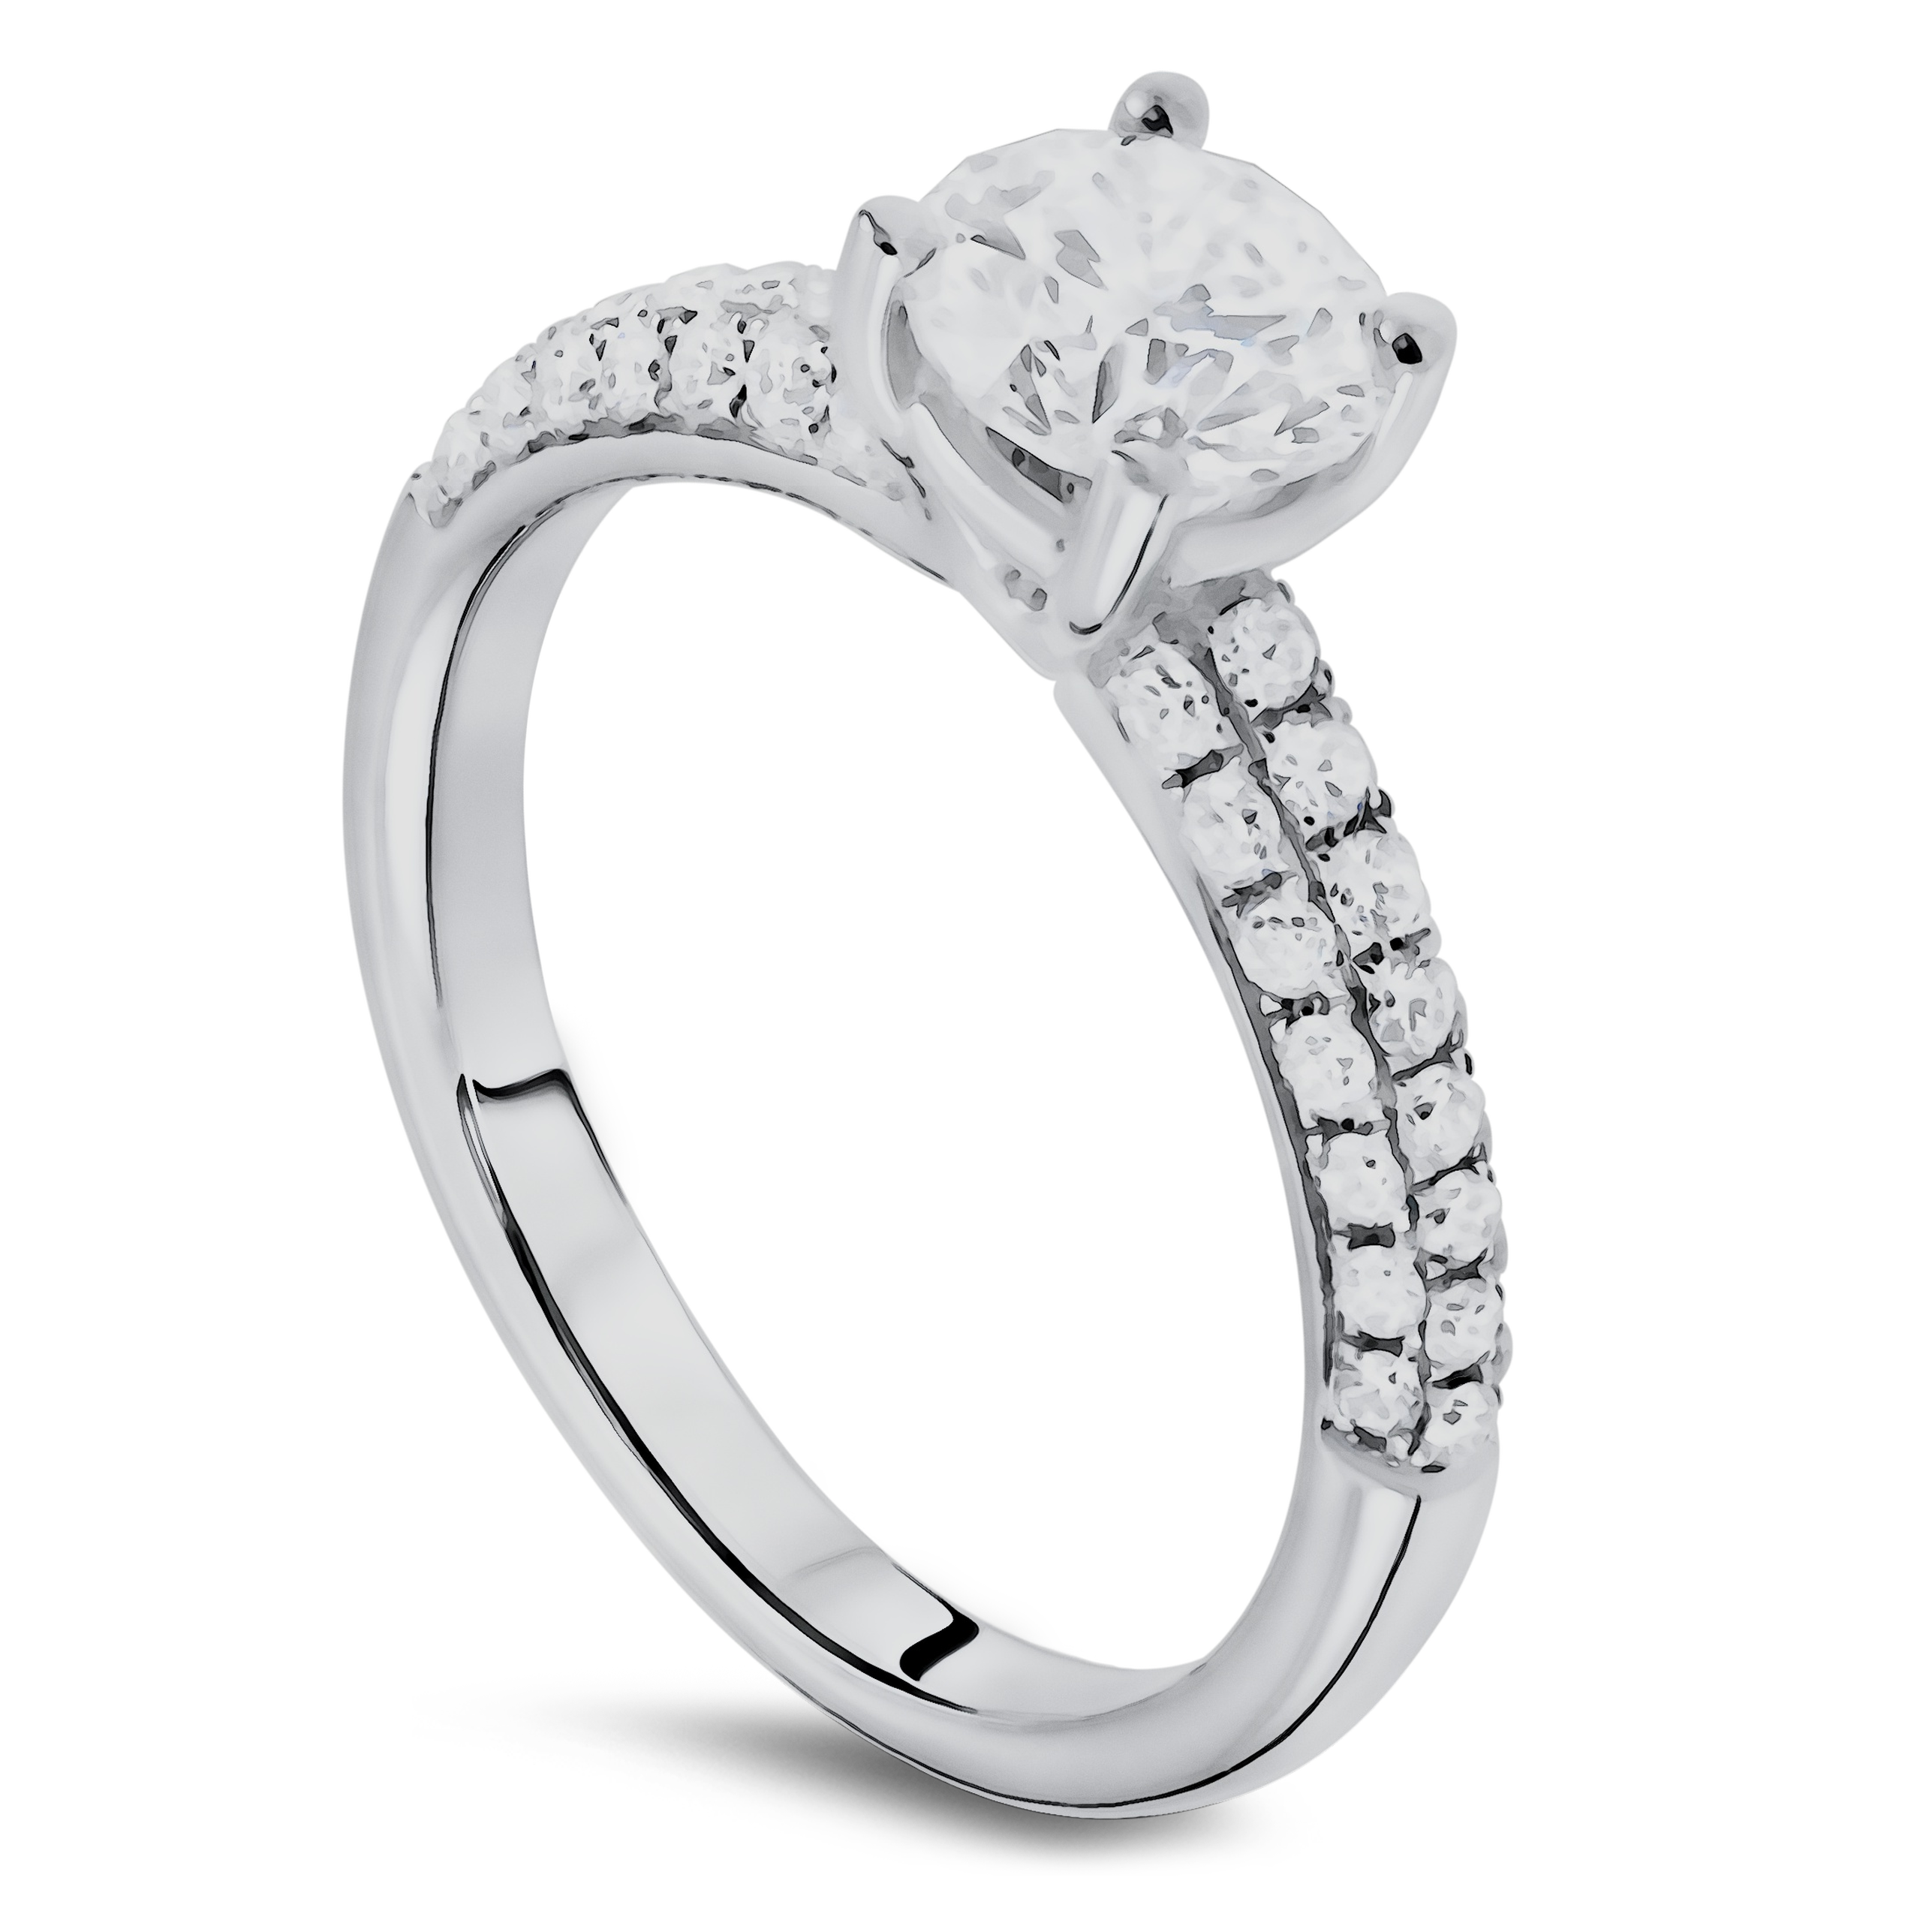 Ring Engagement Solitaire Jewellery Wedding PNG File HD Clipart